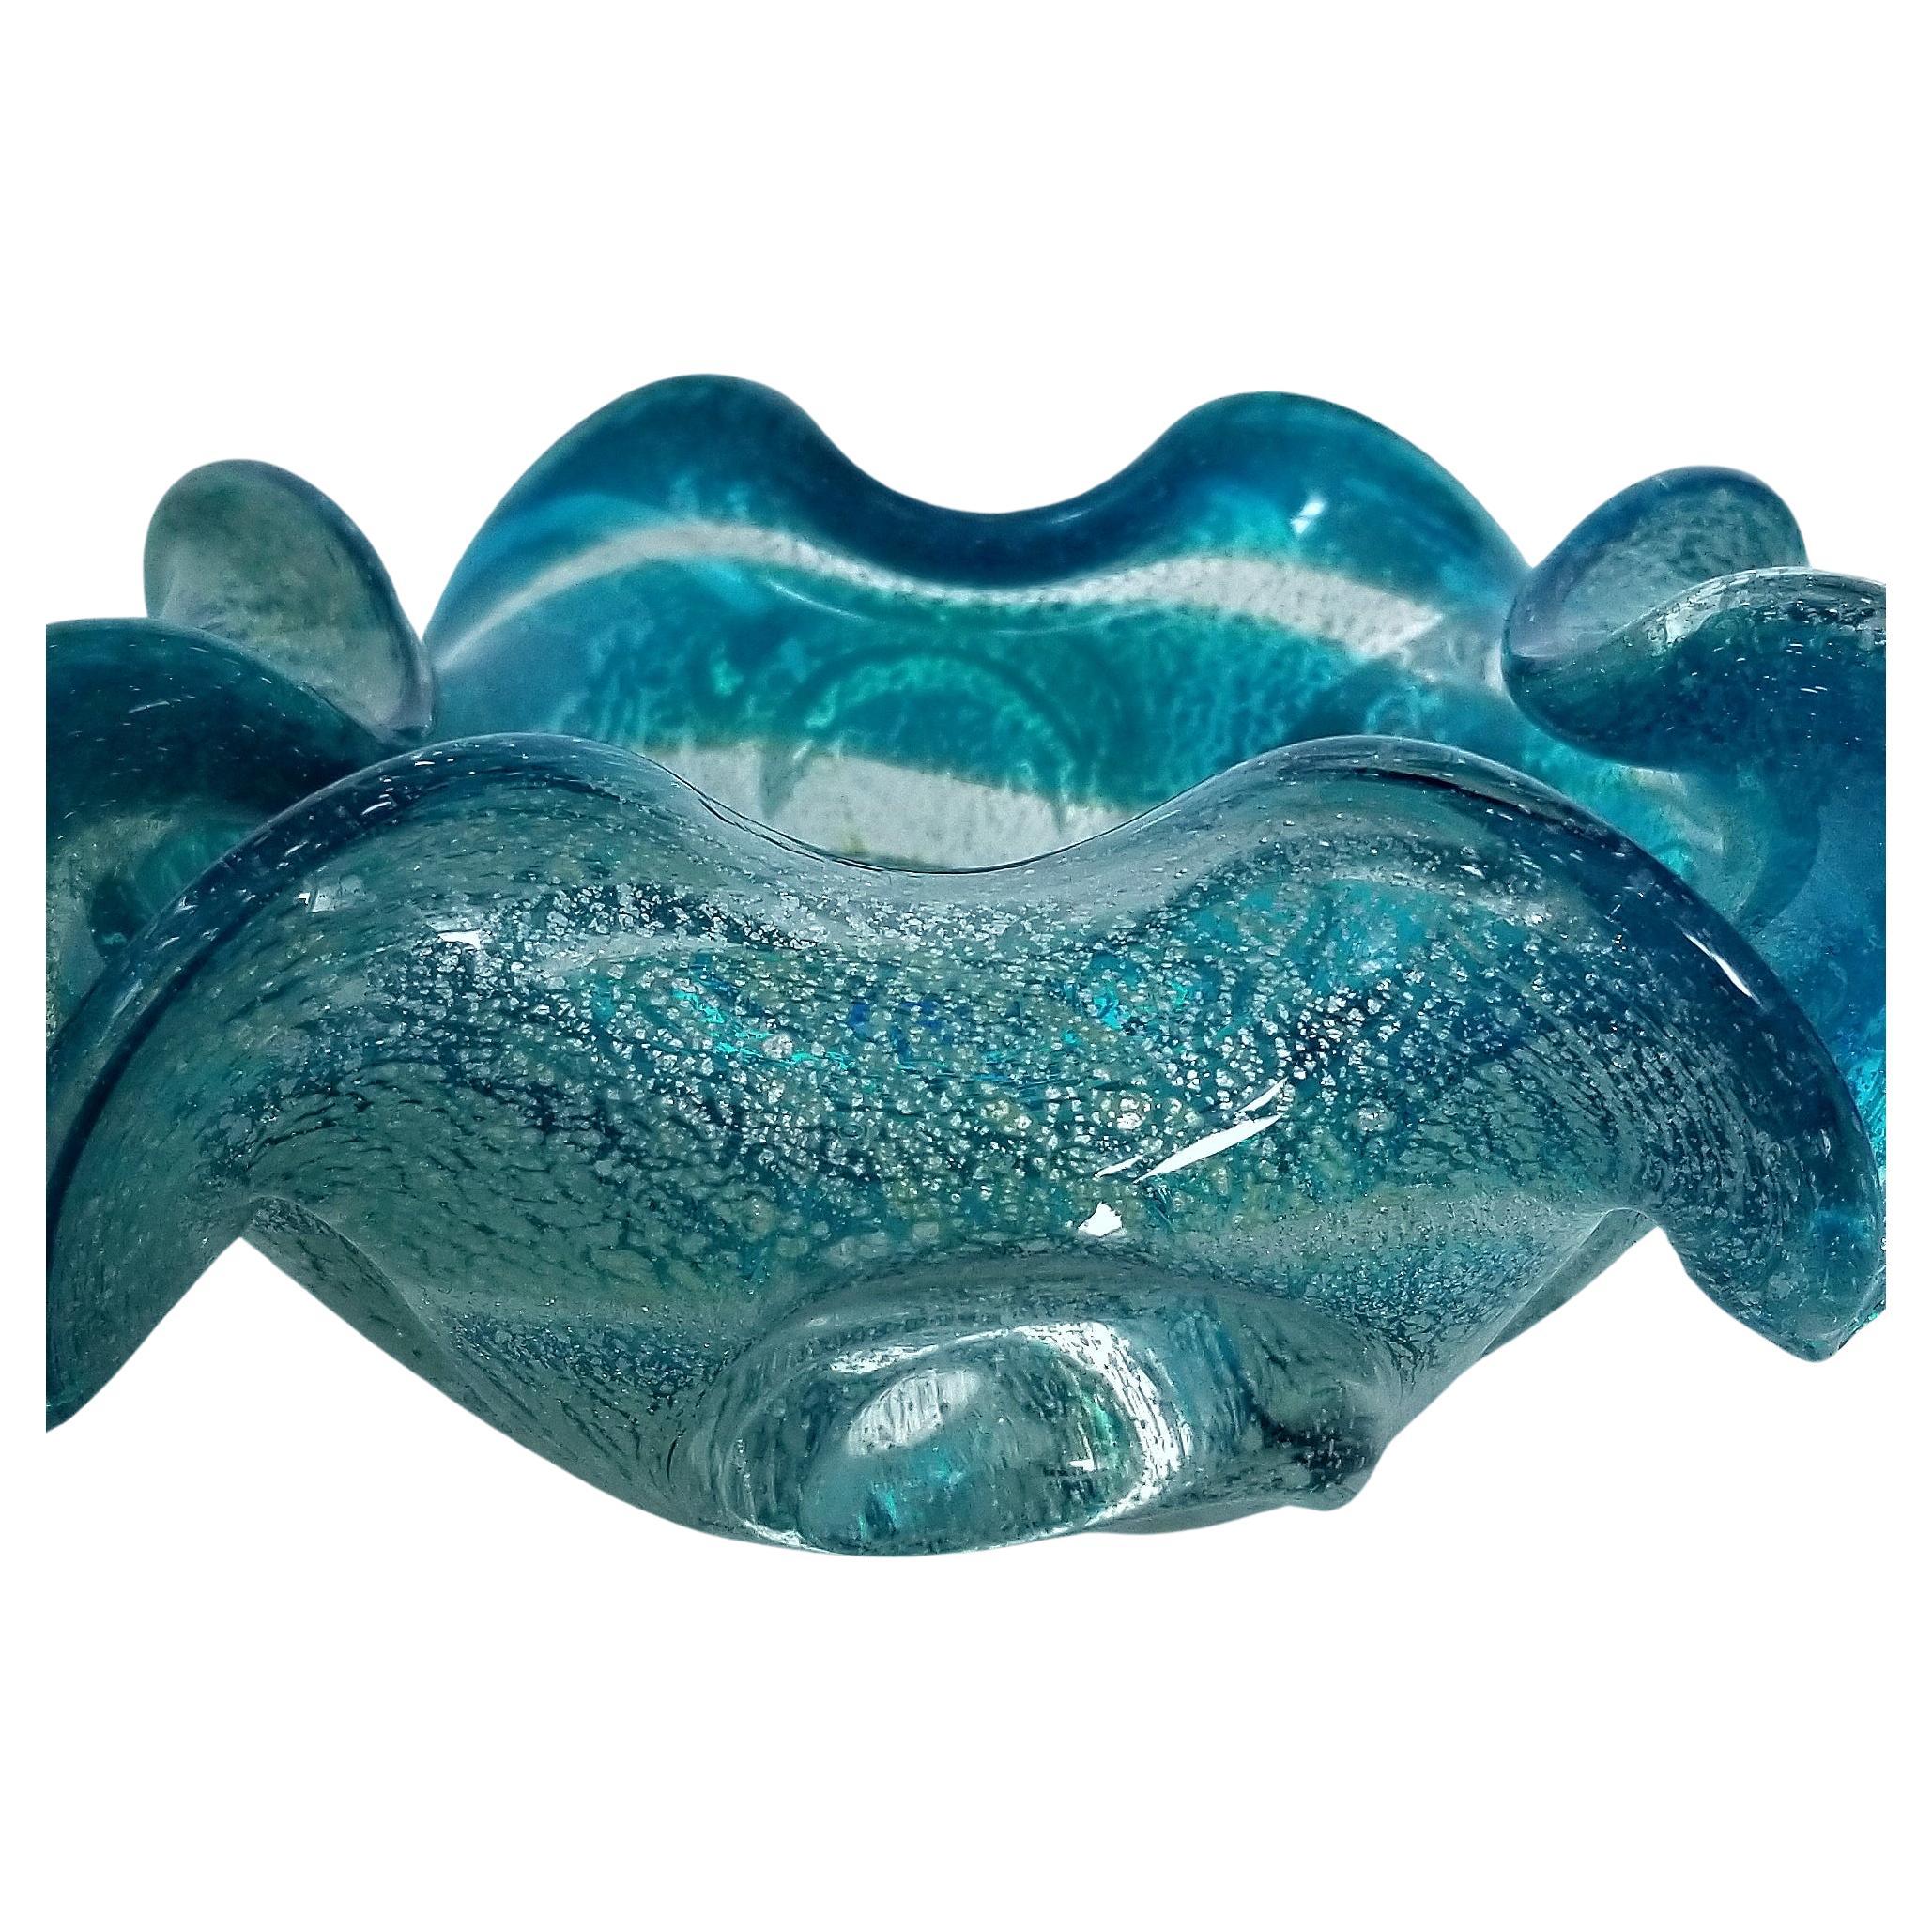 Blue and Silver Murano Glass Ashtray or Catch-all Bowl In Excellent Condition For Sale In Miami, FL